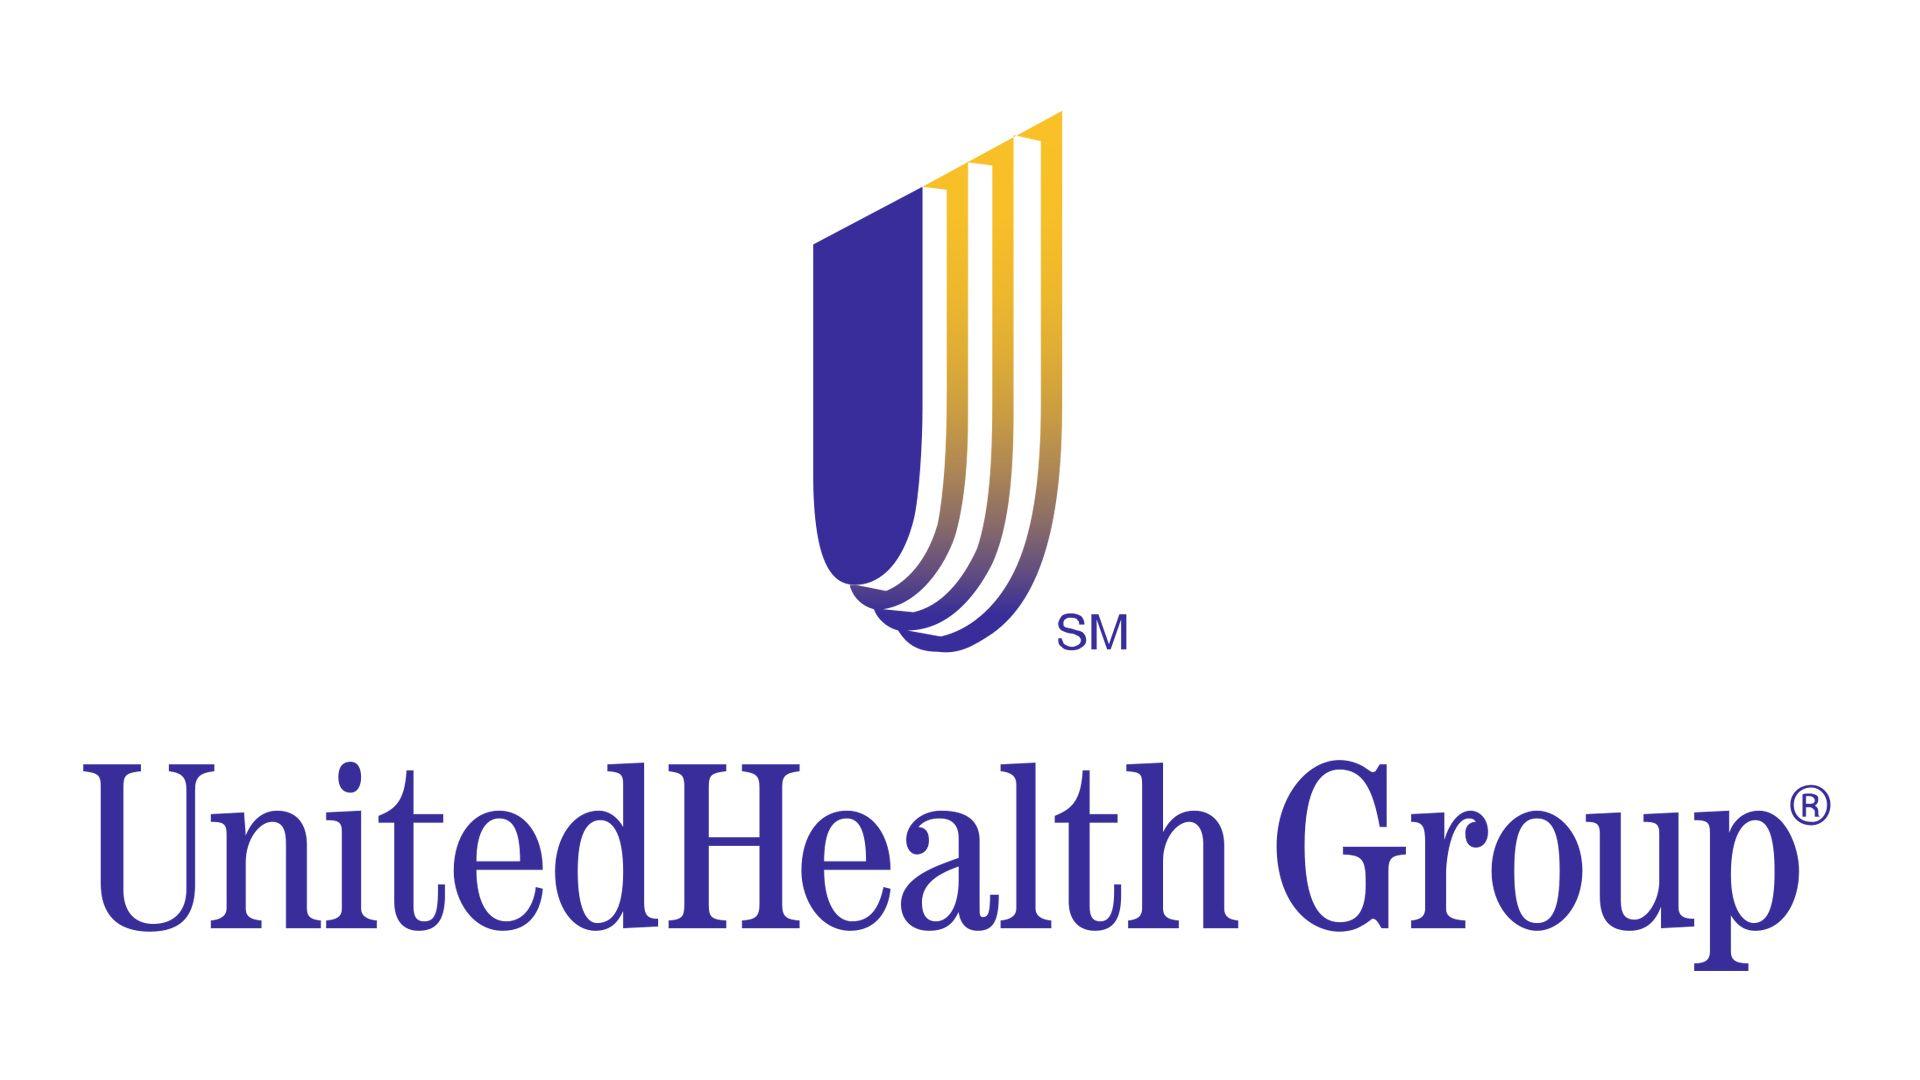 Health Care Logo - United Healthcare Logo, United Healthcare Symbol, Meaning, History